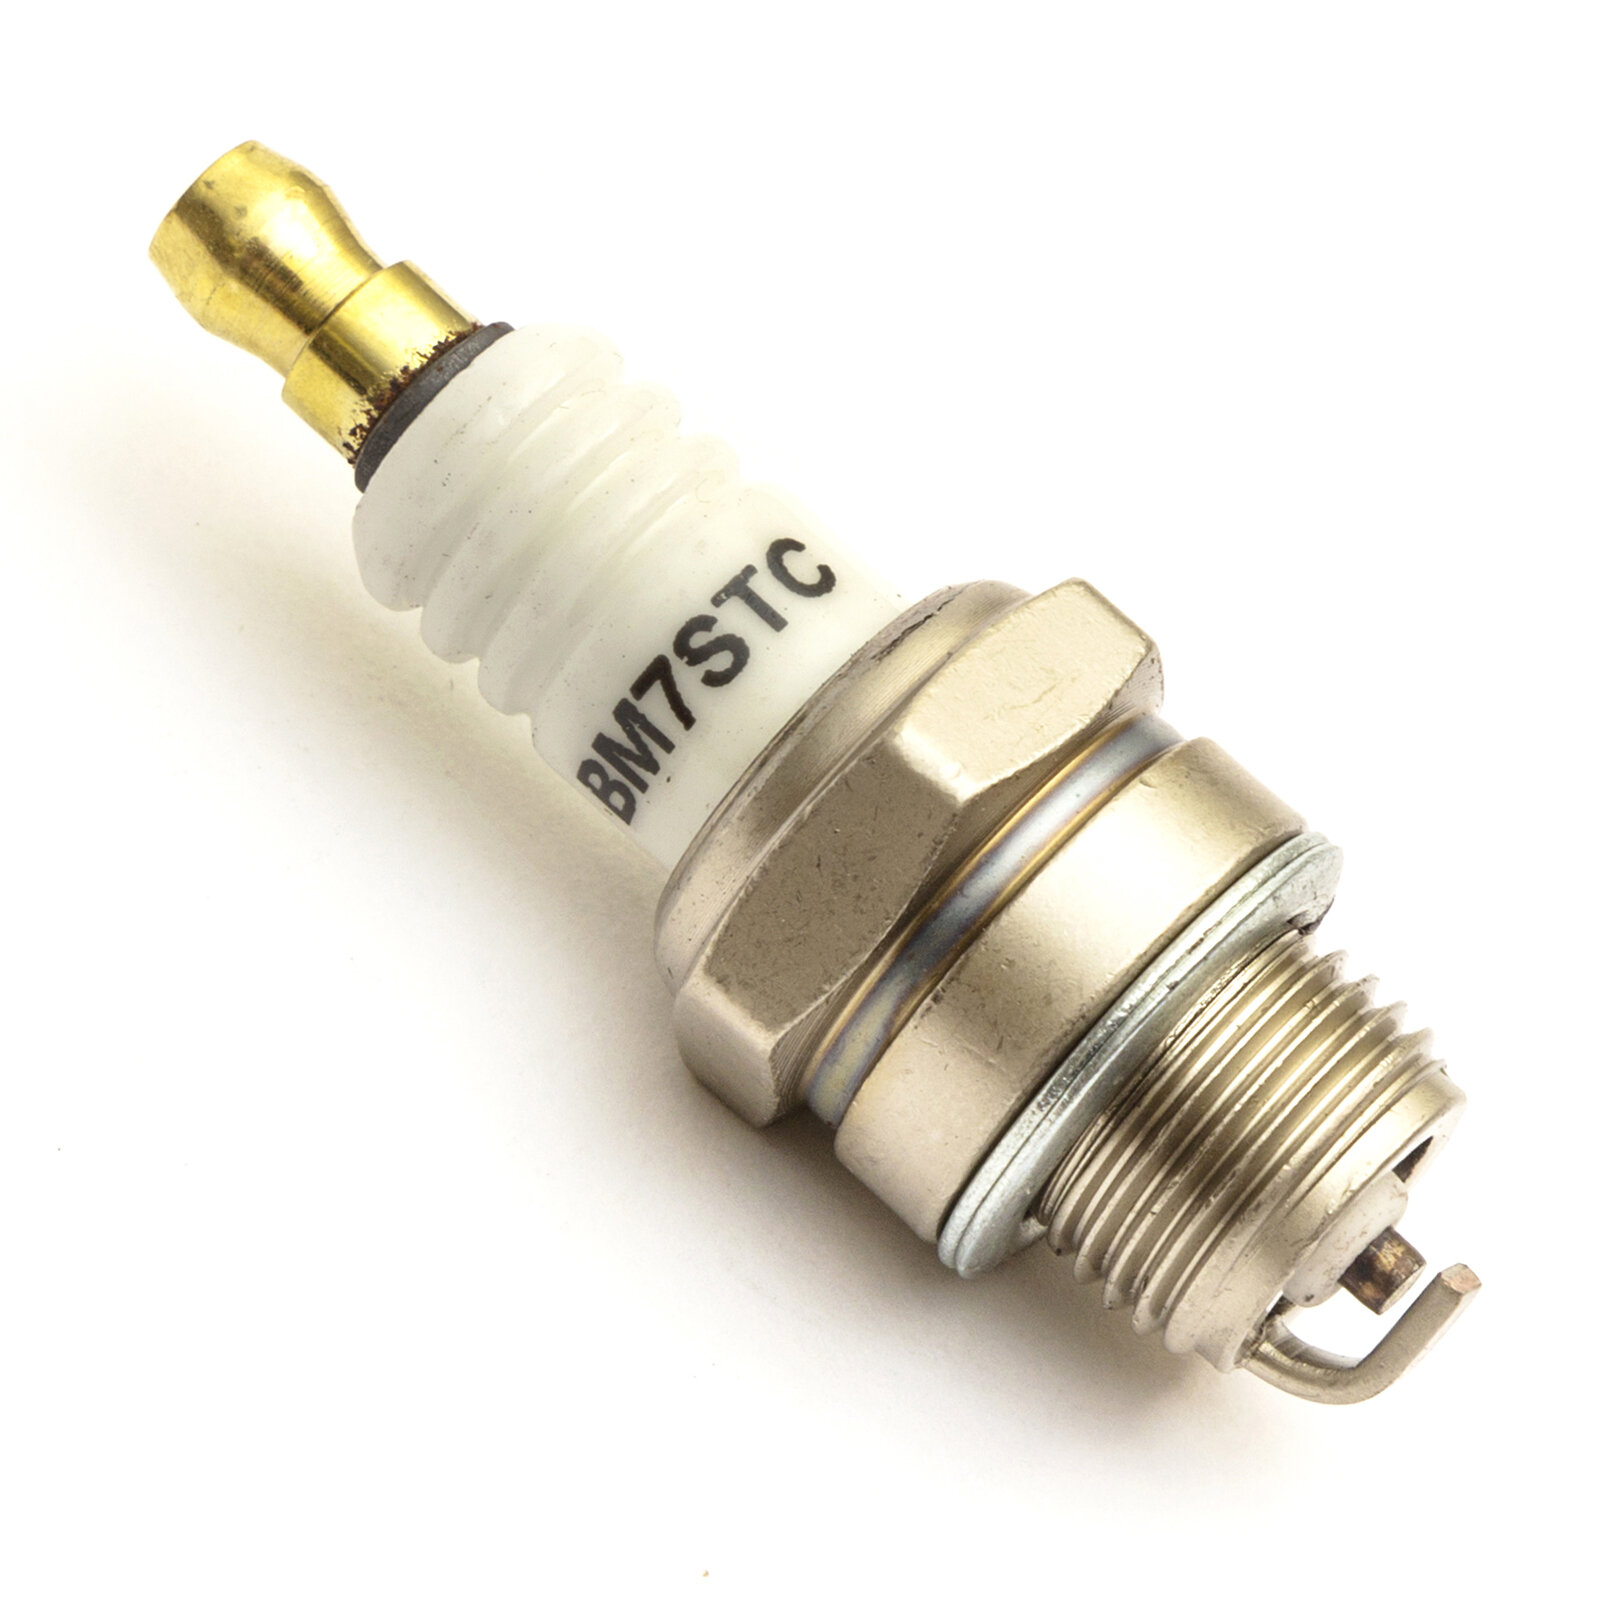 Torch Takumi Spark Plug Replaces NGK BPM7A 7321 Fits Blitz 33S Brushcutter